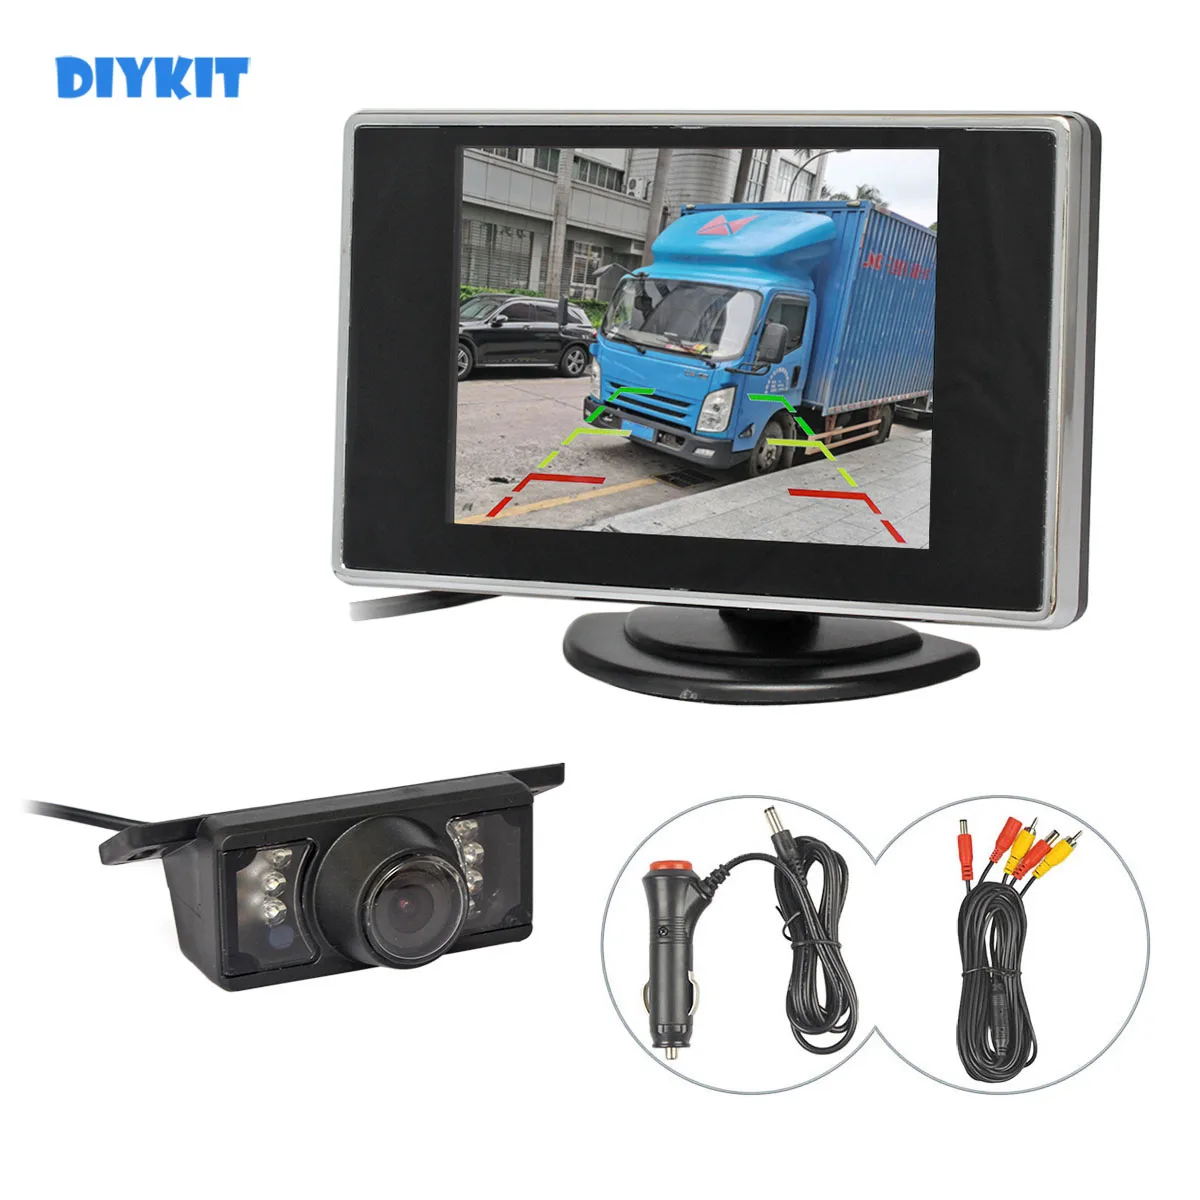 

DIYKIT Wired 3.5inch TFT LCD Car Monitor IR Night Vision Rear View Car Camera Kit Reversing Camera Parking Assistance System